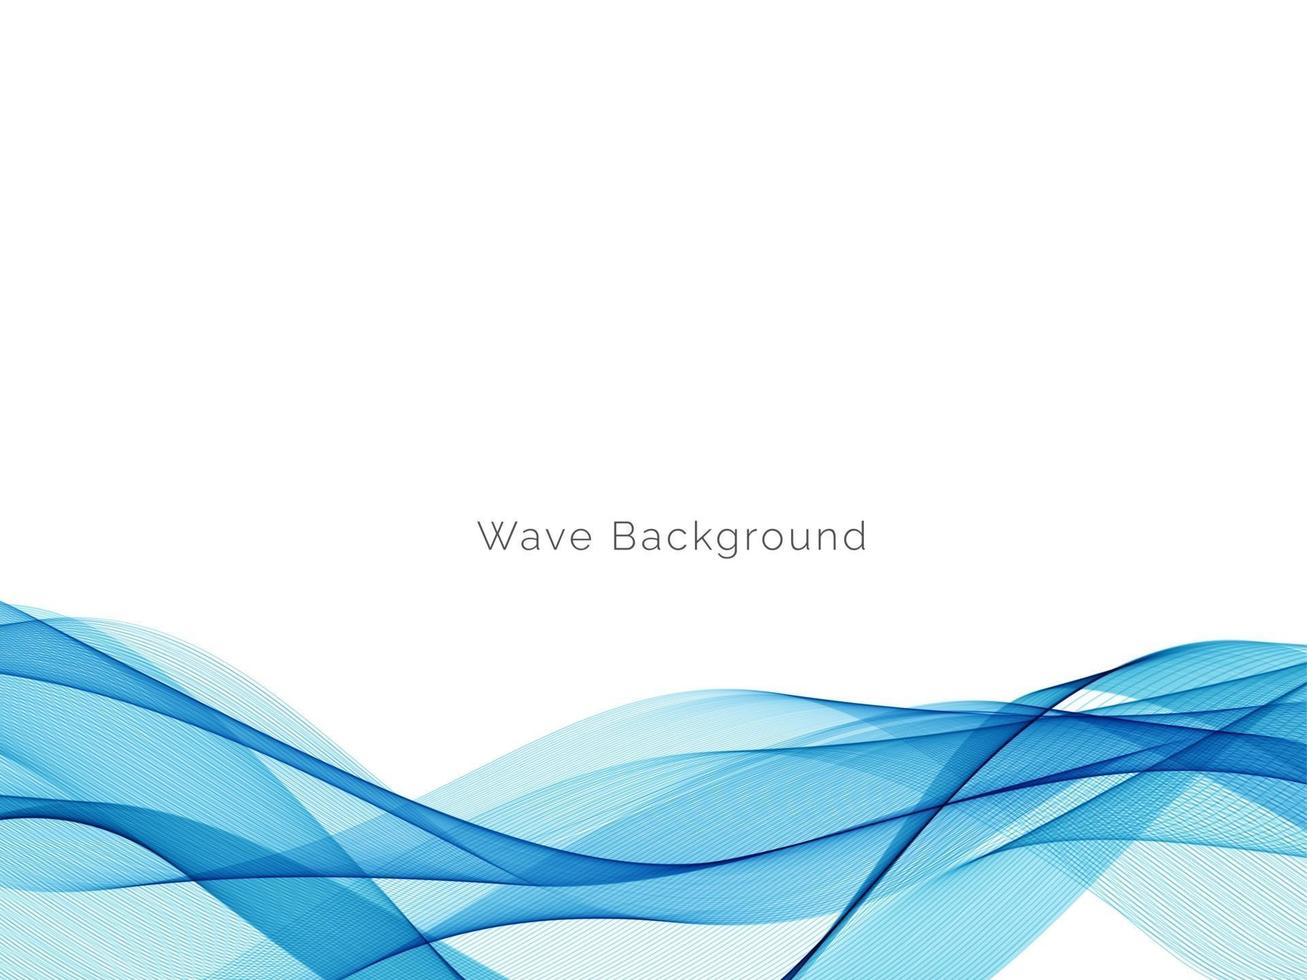 Abstract blue modern dynamic wave design background vector